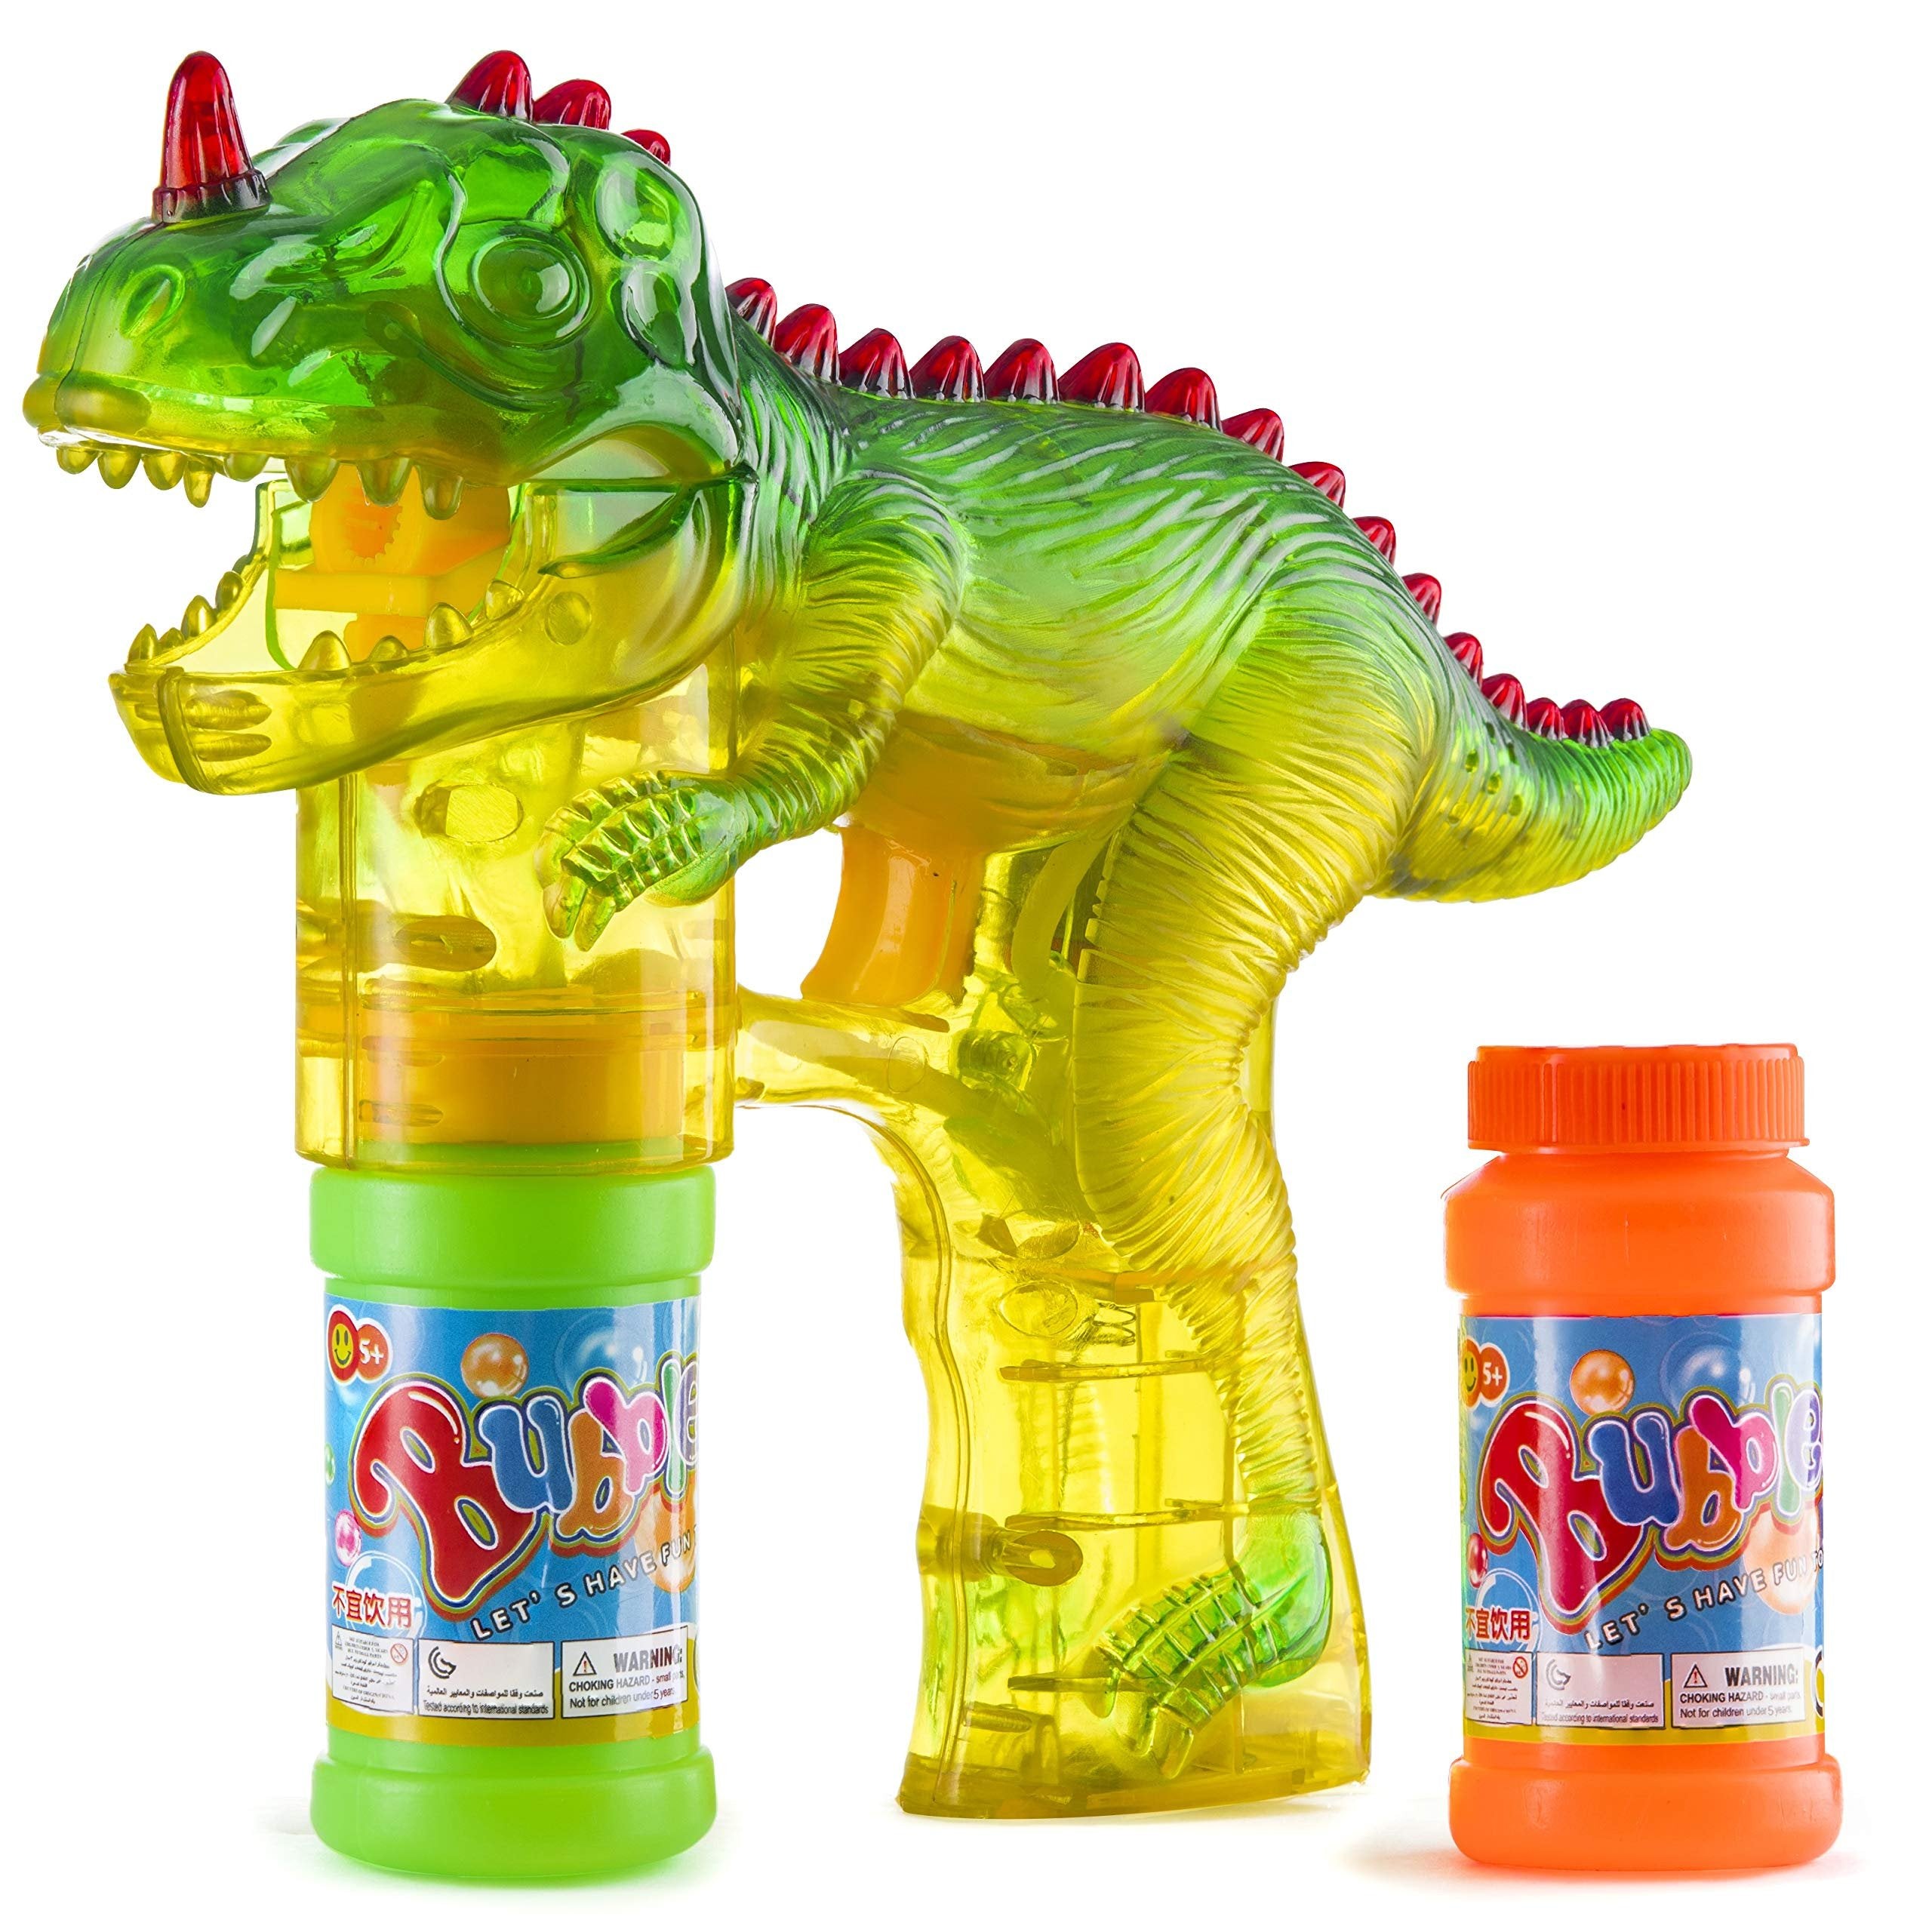 Prextex Dinosaur Bubble Gun Toy w/LED Light and Dinosaur Sounds | Bubble Machine Guns for Toddlers, Kids, Adults | Bubble-Maker Toys | Party, Easter, Birthday Gifts Bubbles | Kid/Toddler Gift Favors